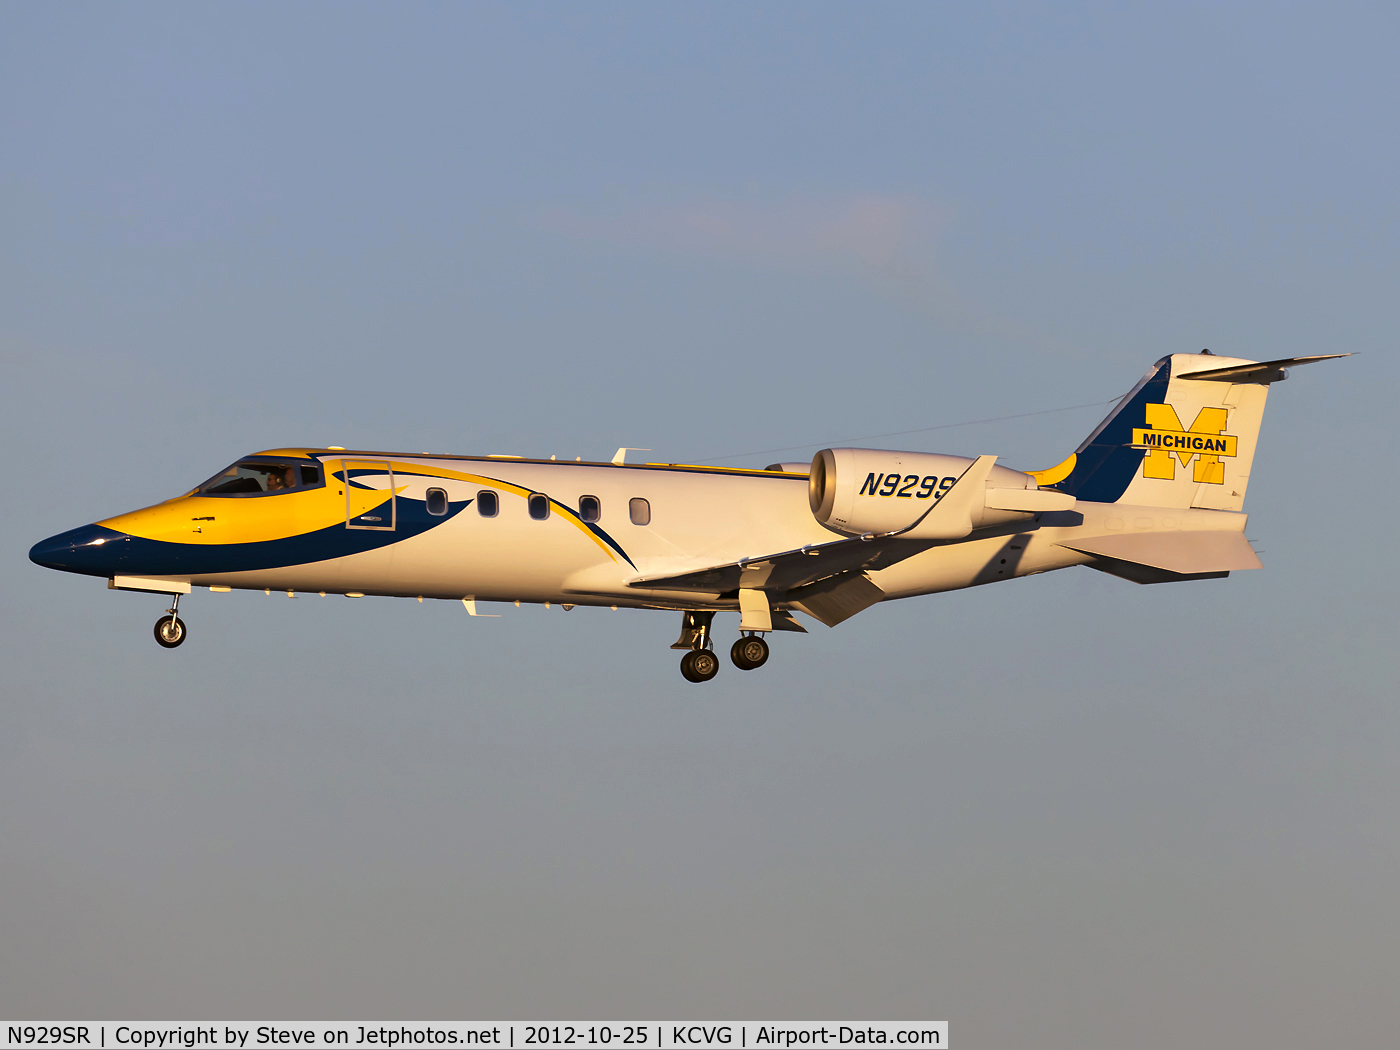 N929SR, 1998 Learjet Inc 60 C/N 144, Spotted early morning Oct. 25th, 2012 heading into runway 18C at KCVG.